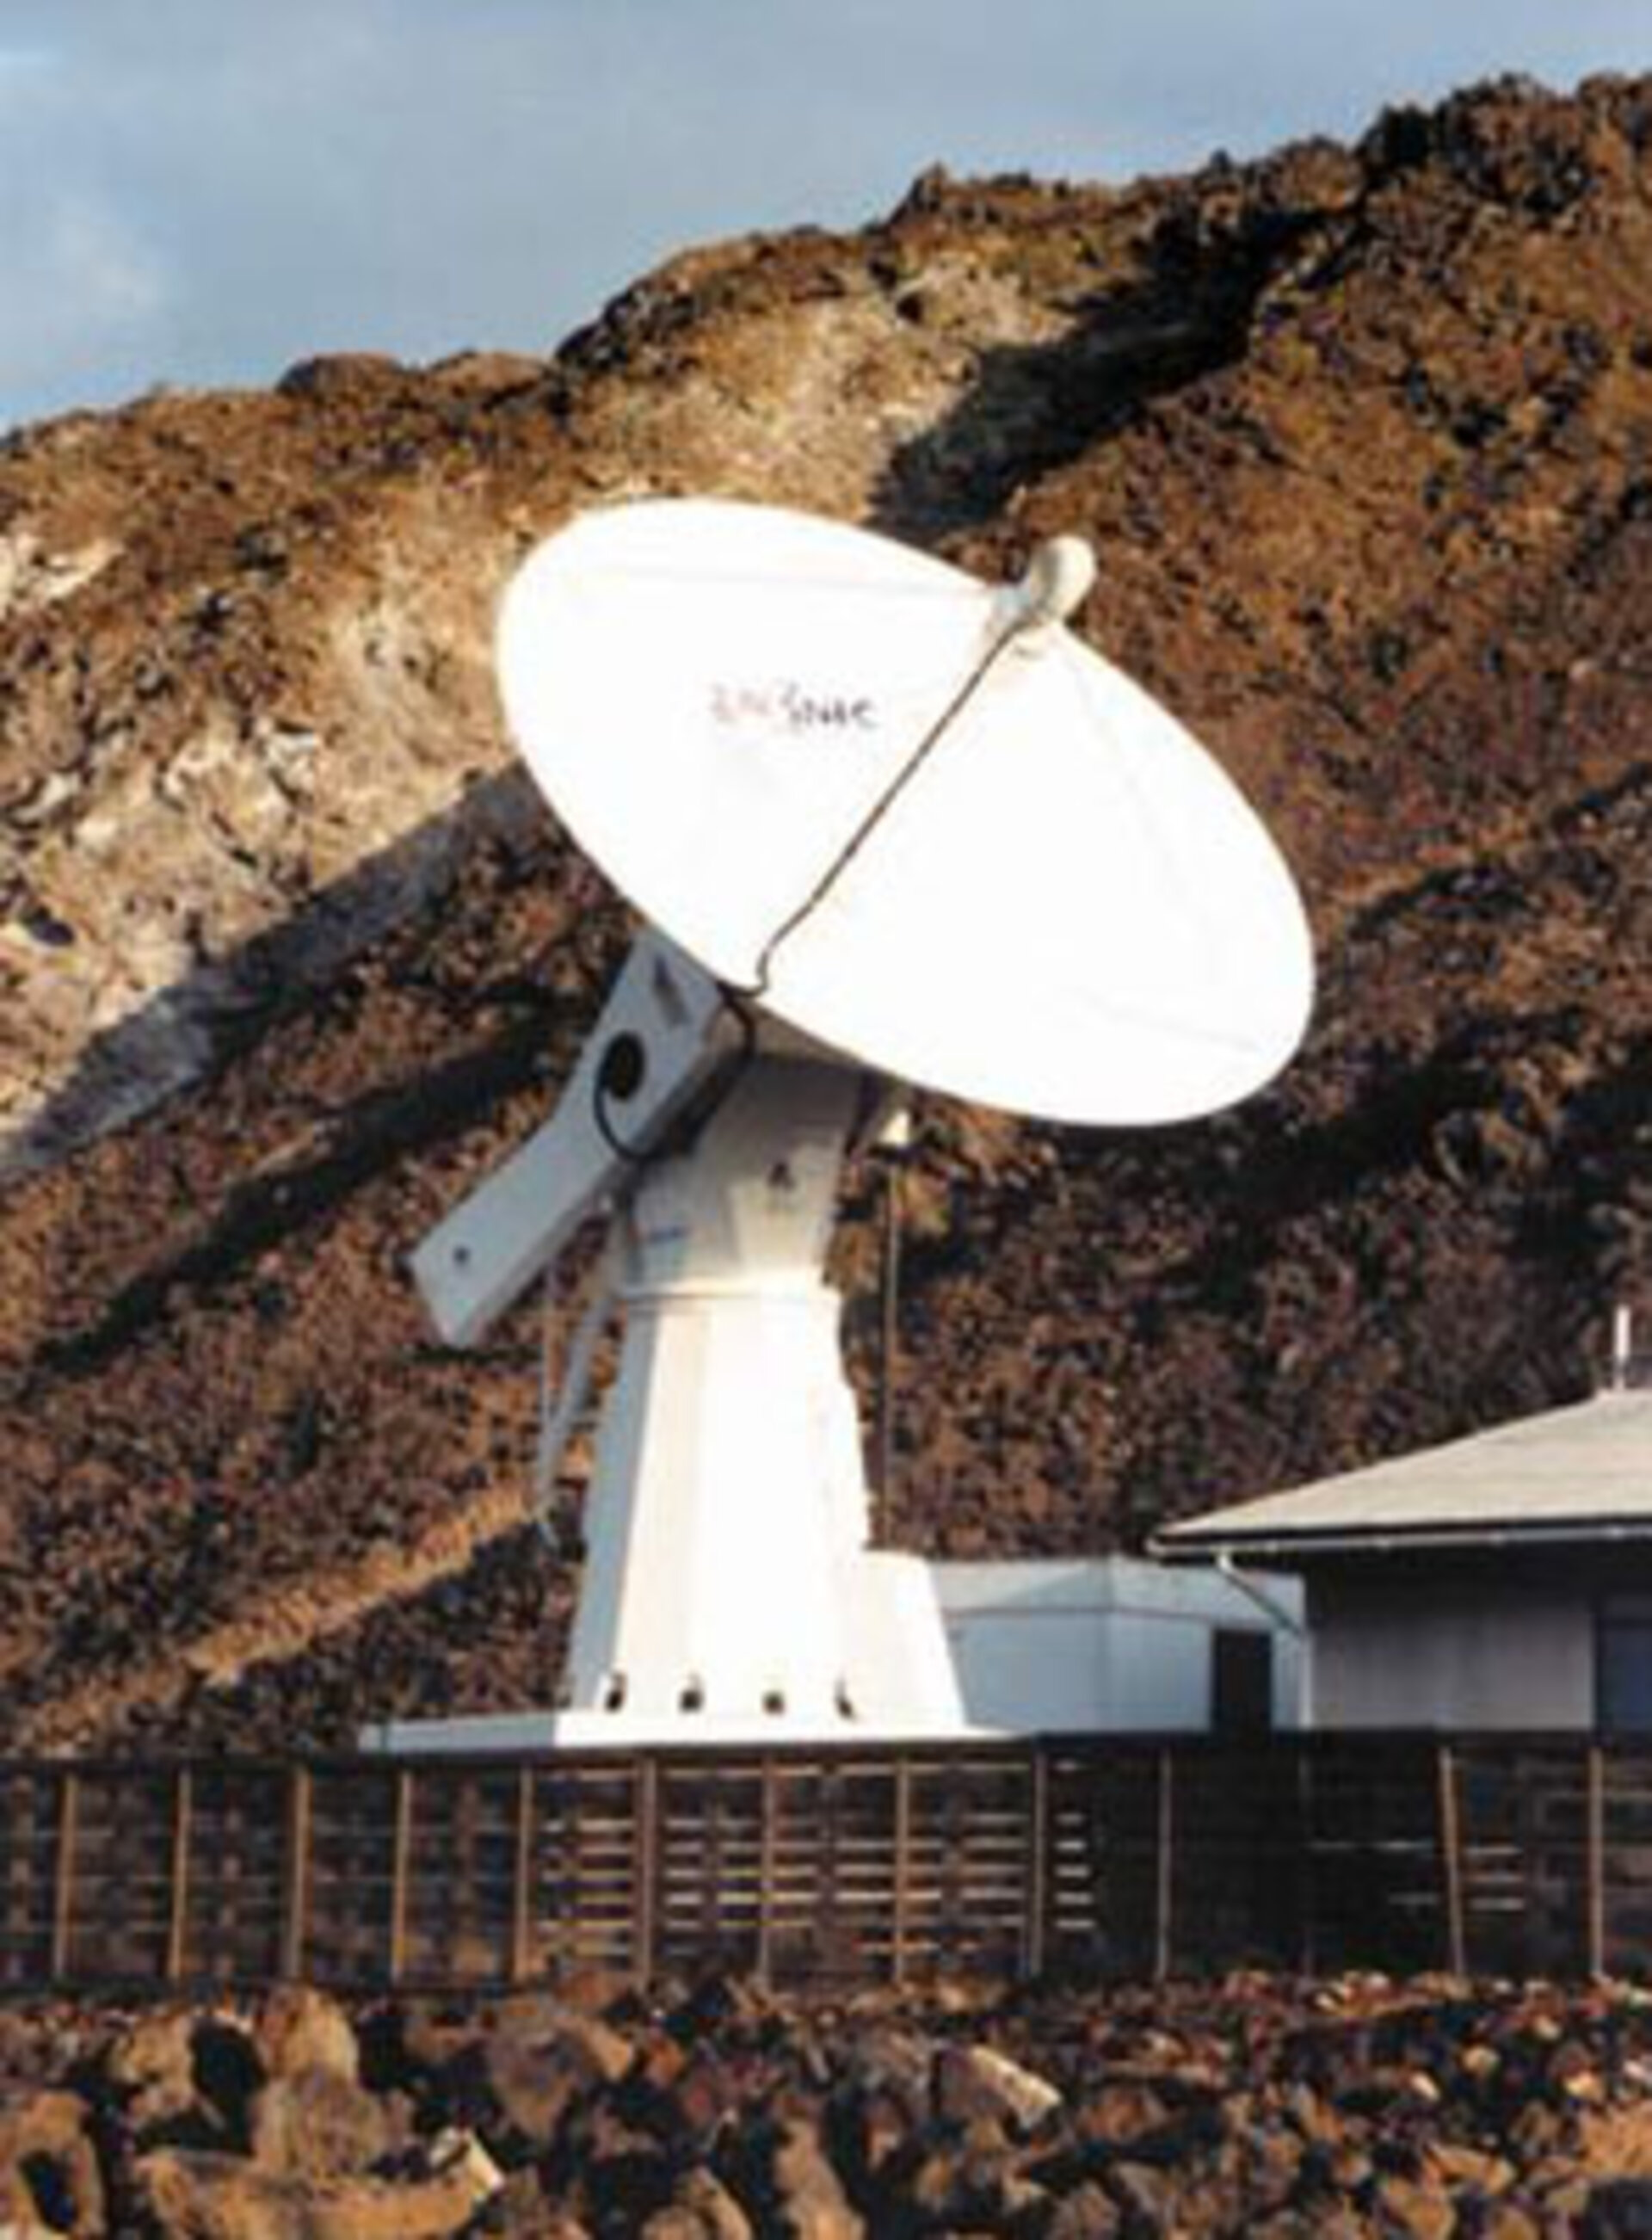 Ground station on Ascension Island used to track satellites and launchers